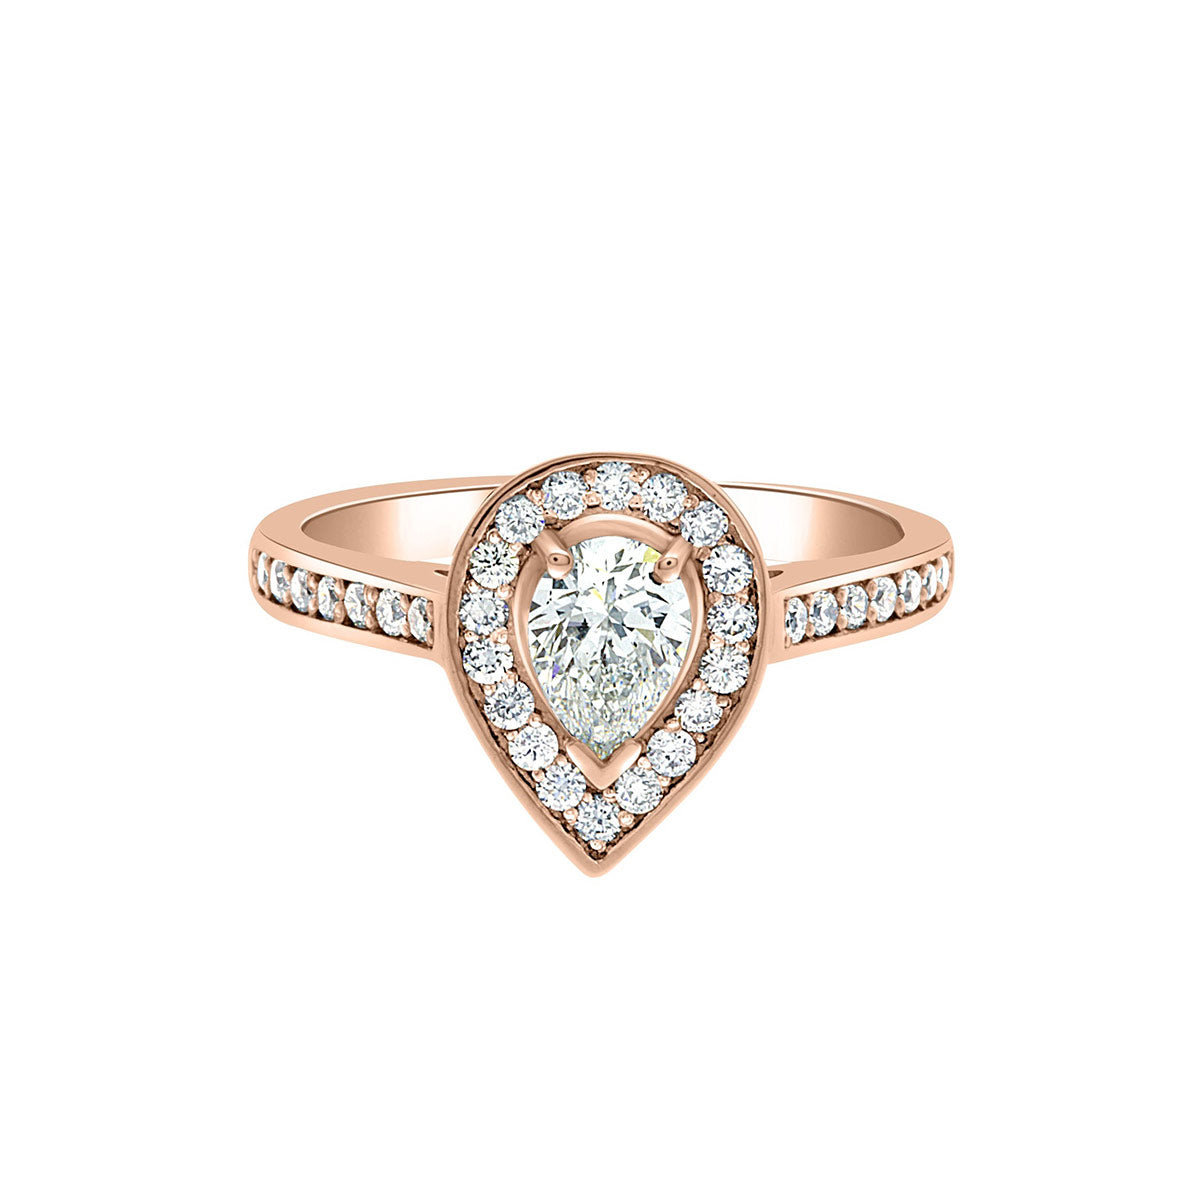 Pear Shaped Halo Engagement Ring in rose gold, laying flat on white surface, white background